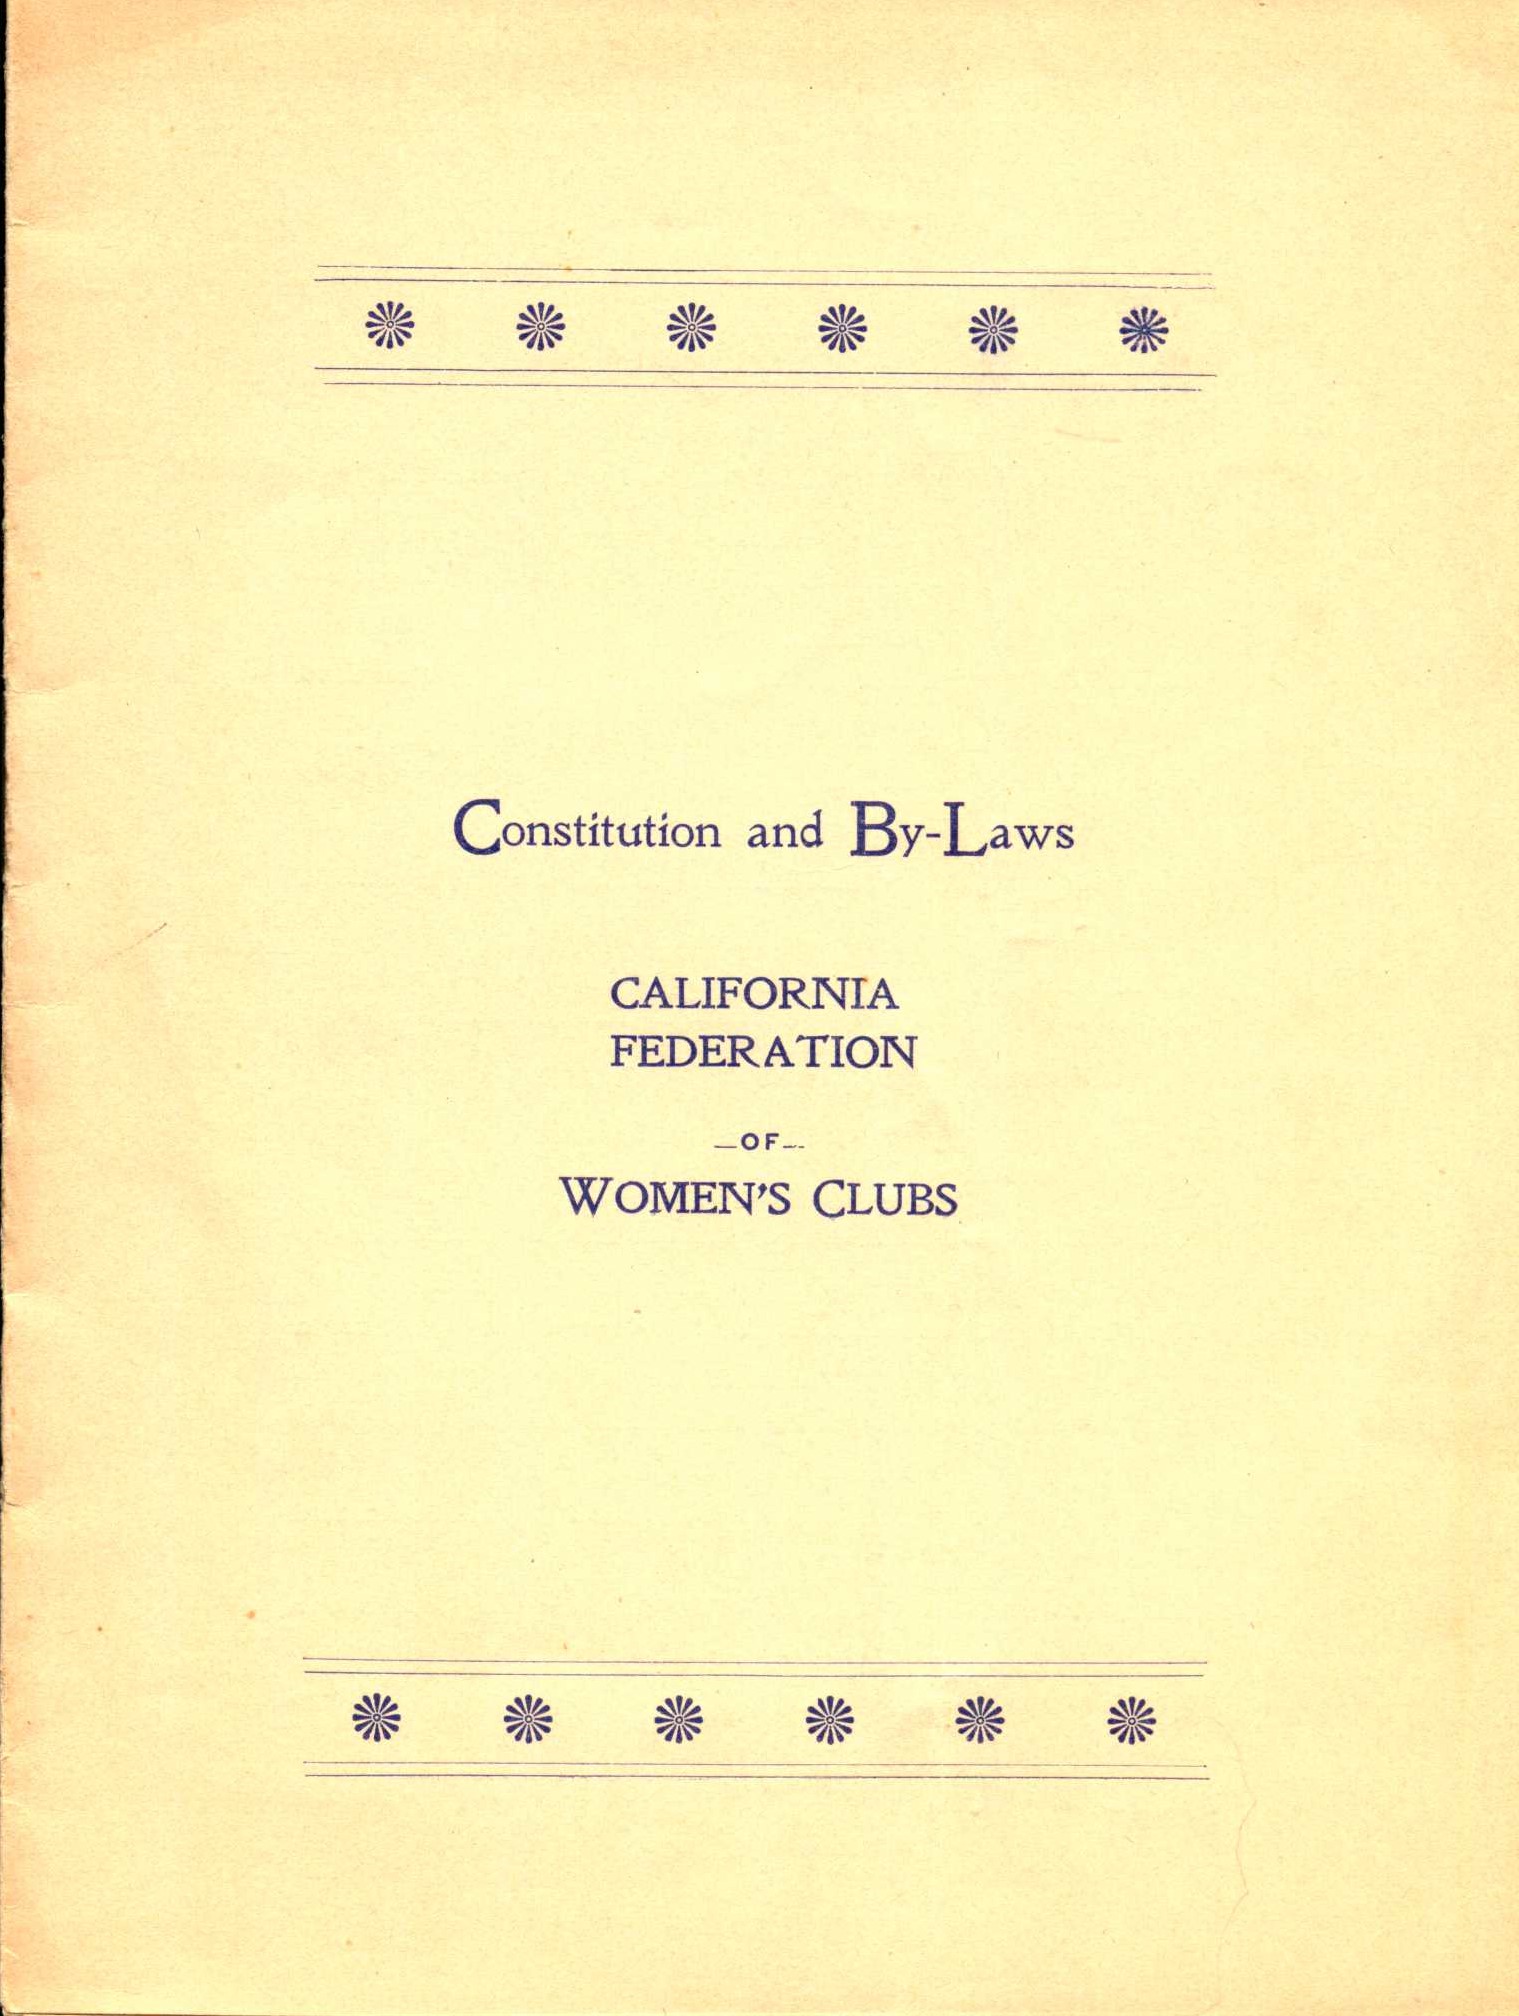 Front cover shows the title information and a decorative frame